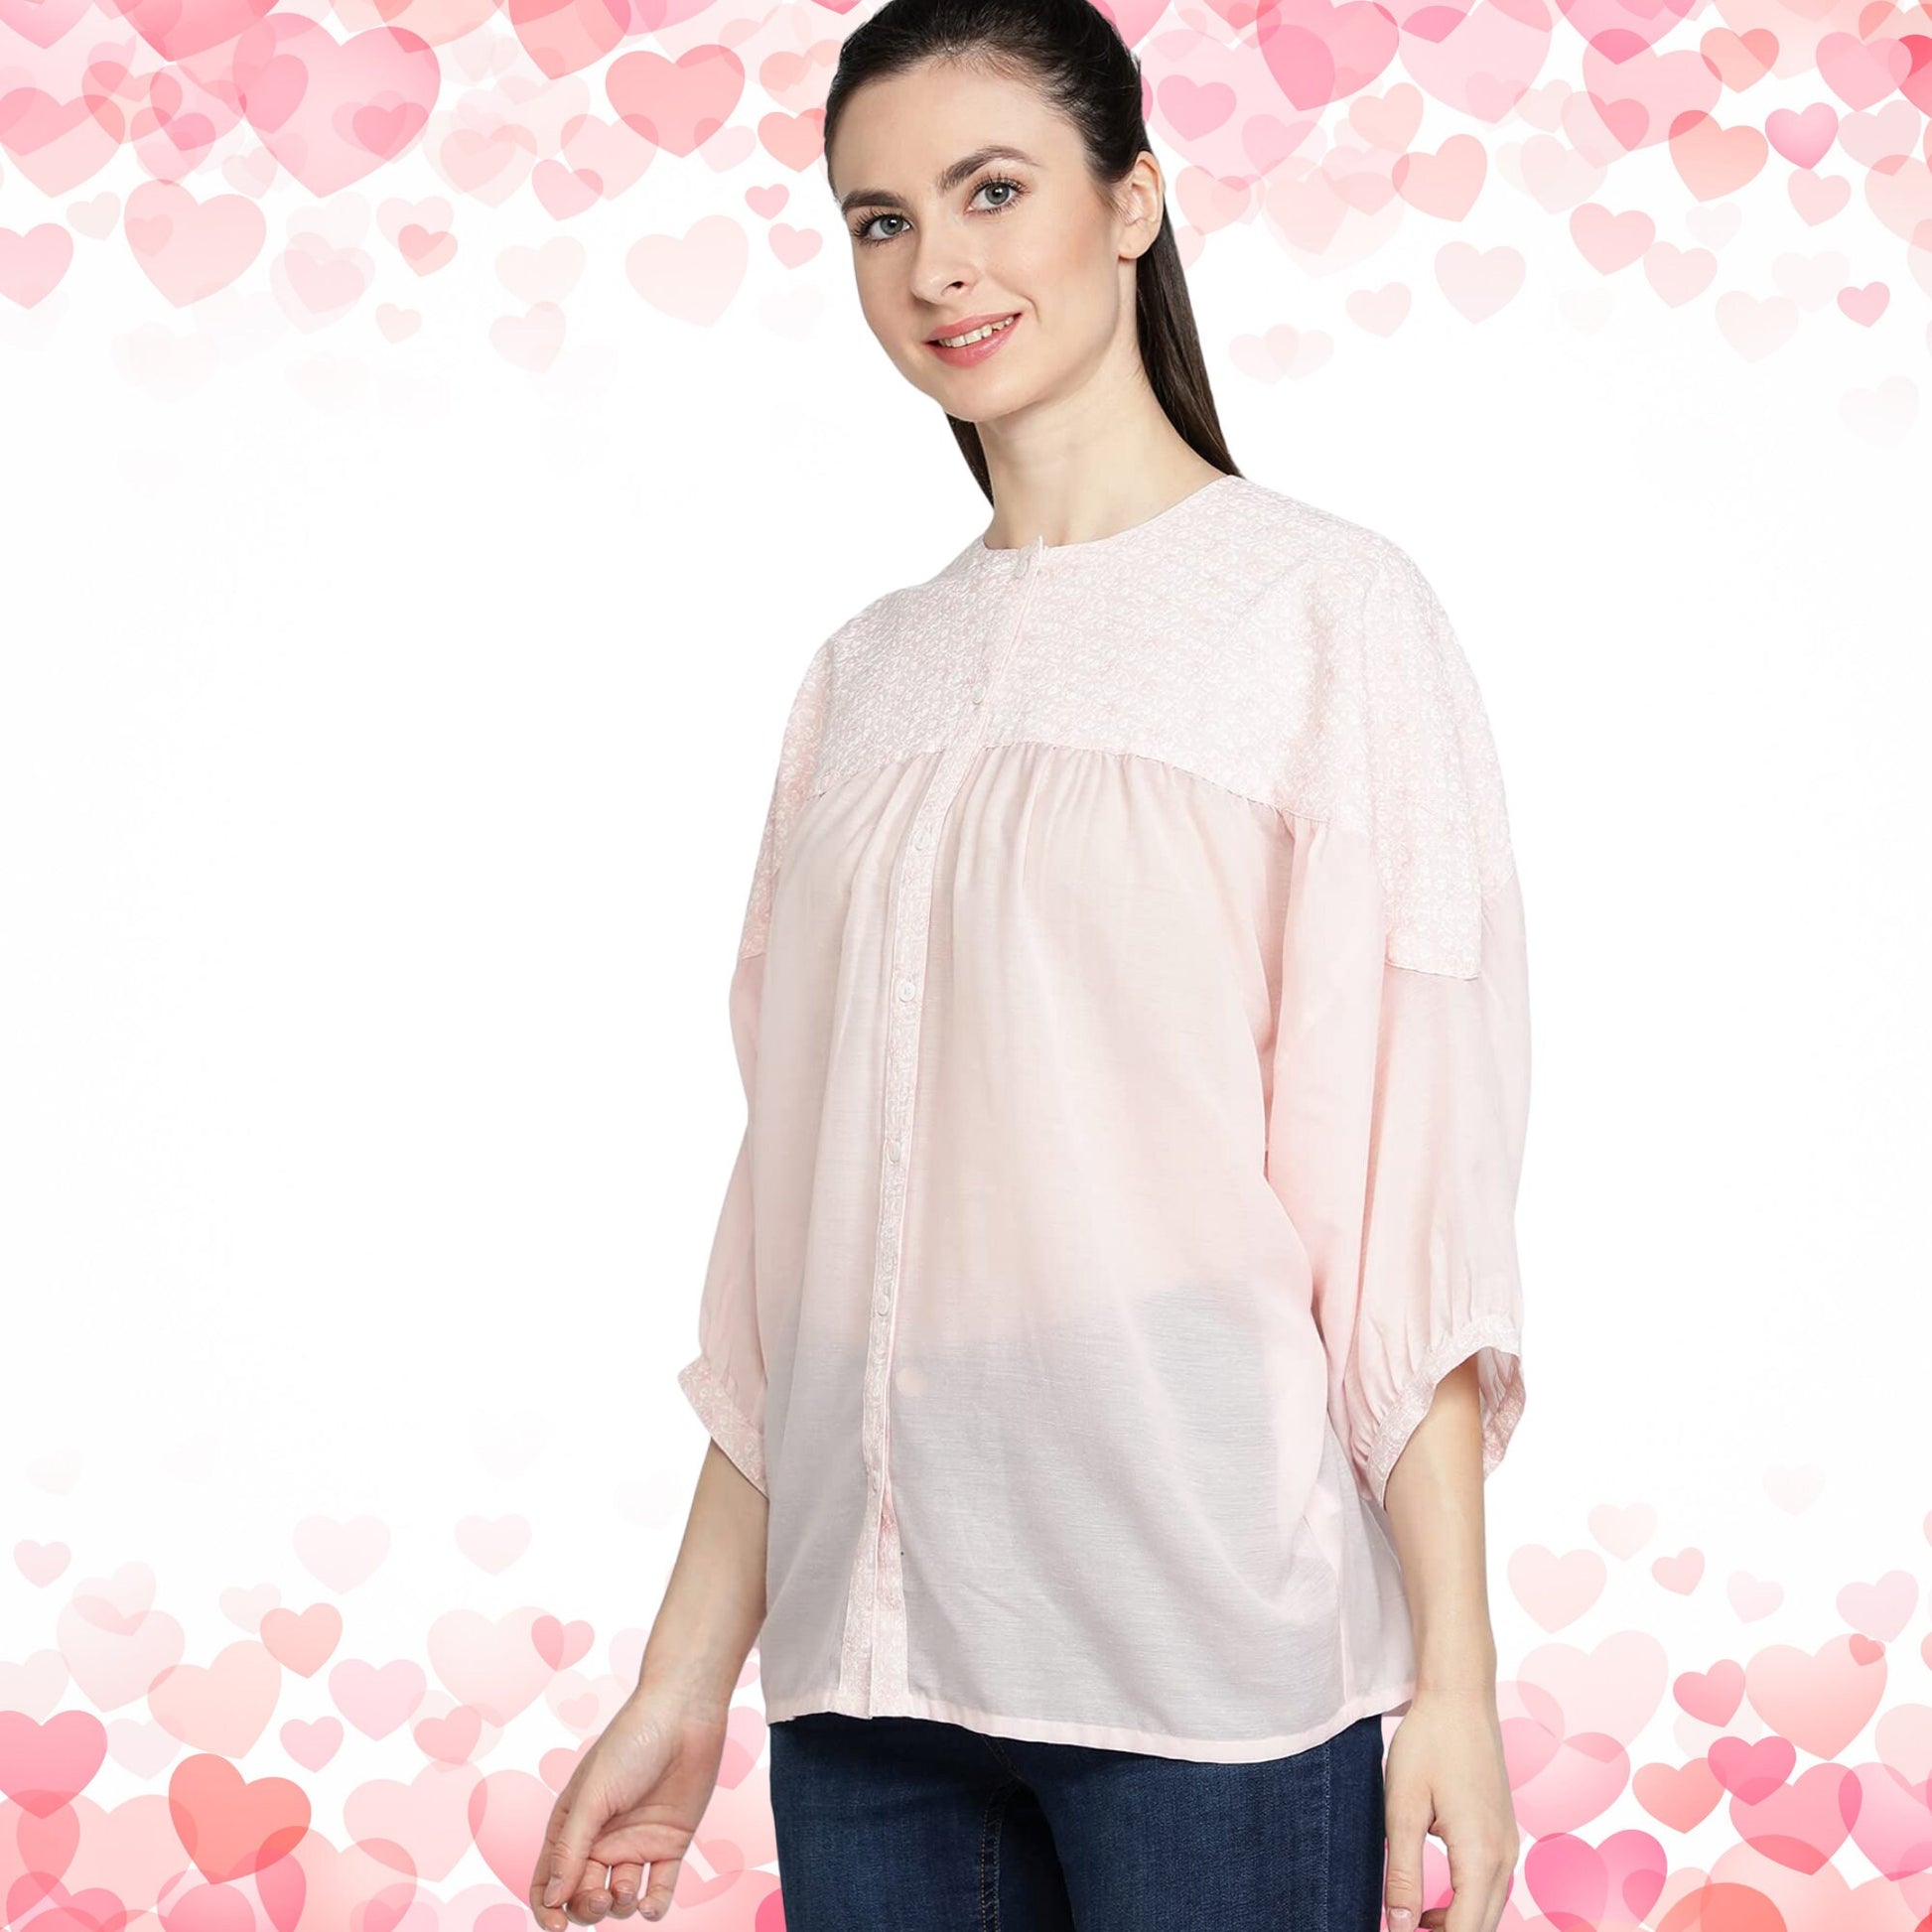 women's_pink_top  Round_neck_top  printed_pink_top  Pink_top  Pink_blouse  modern_style_top  Light_pink_top  Gift_for_her_top  Extended_sleeves  Designer_top  Beautiful_top  3_by_4_sleeves_top